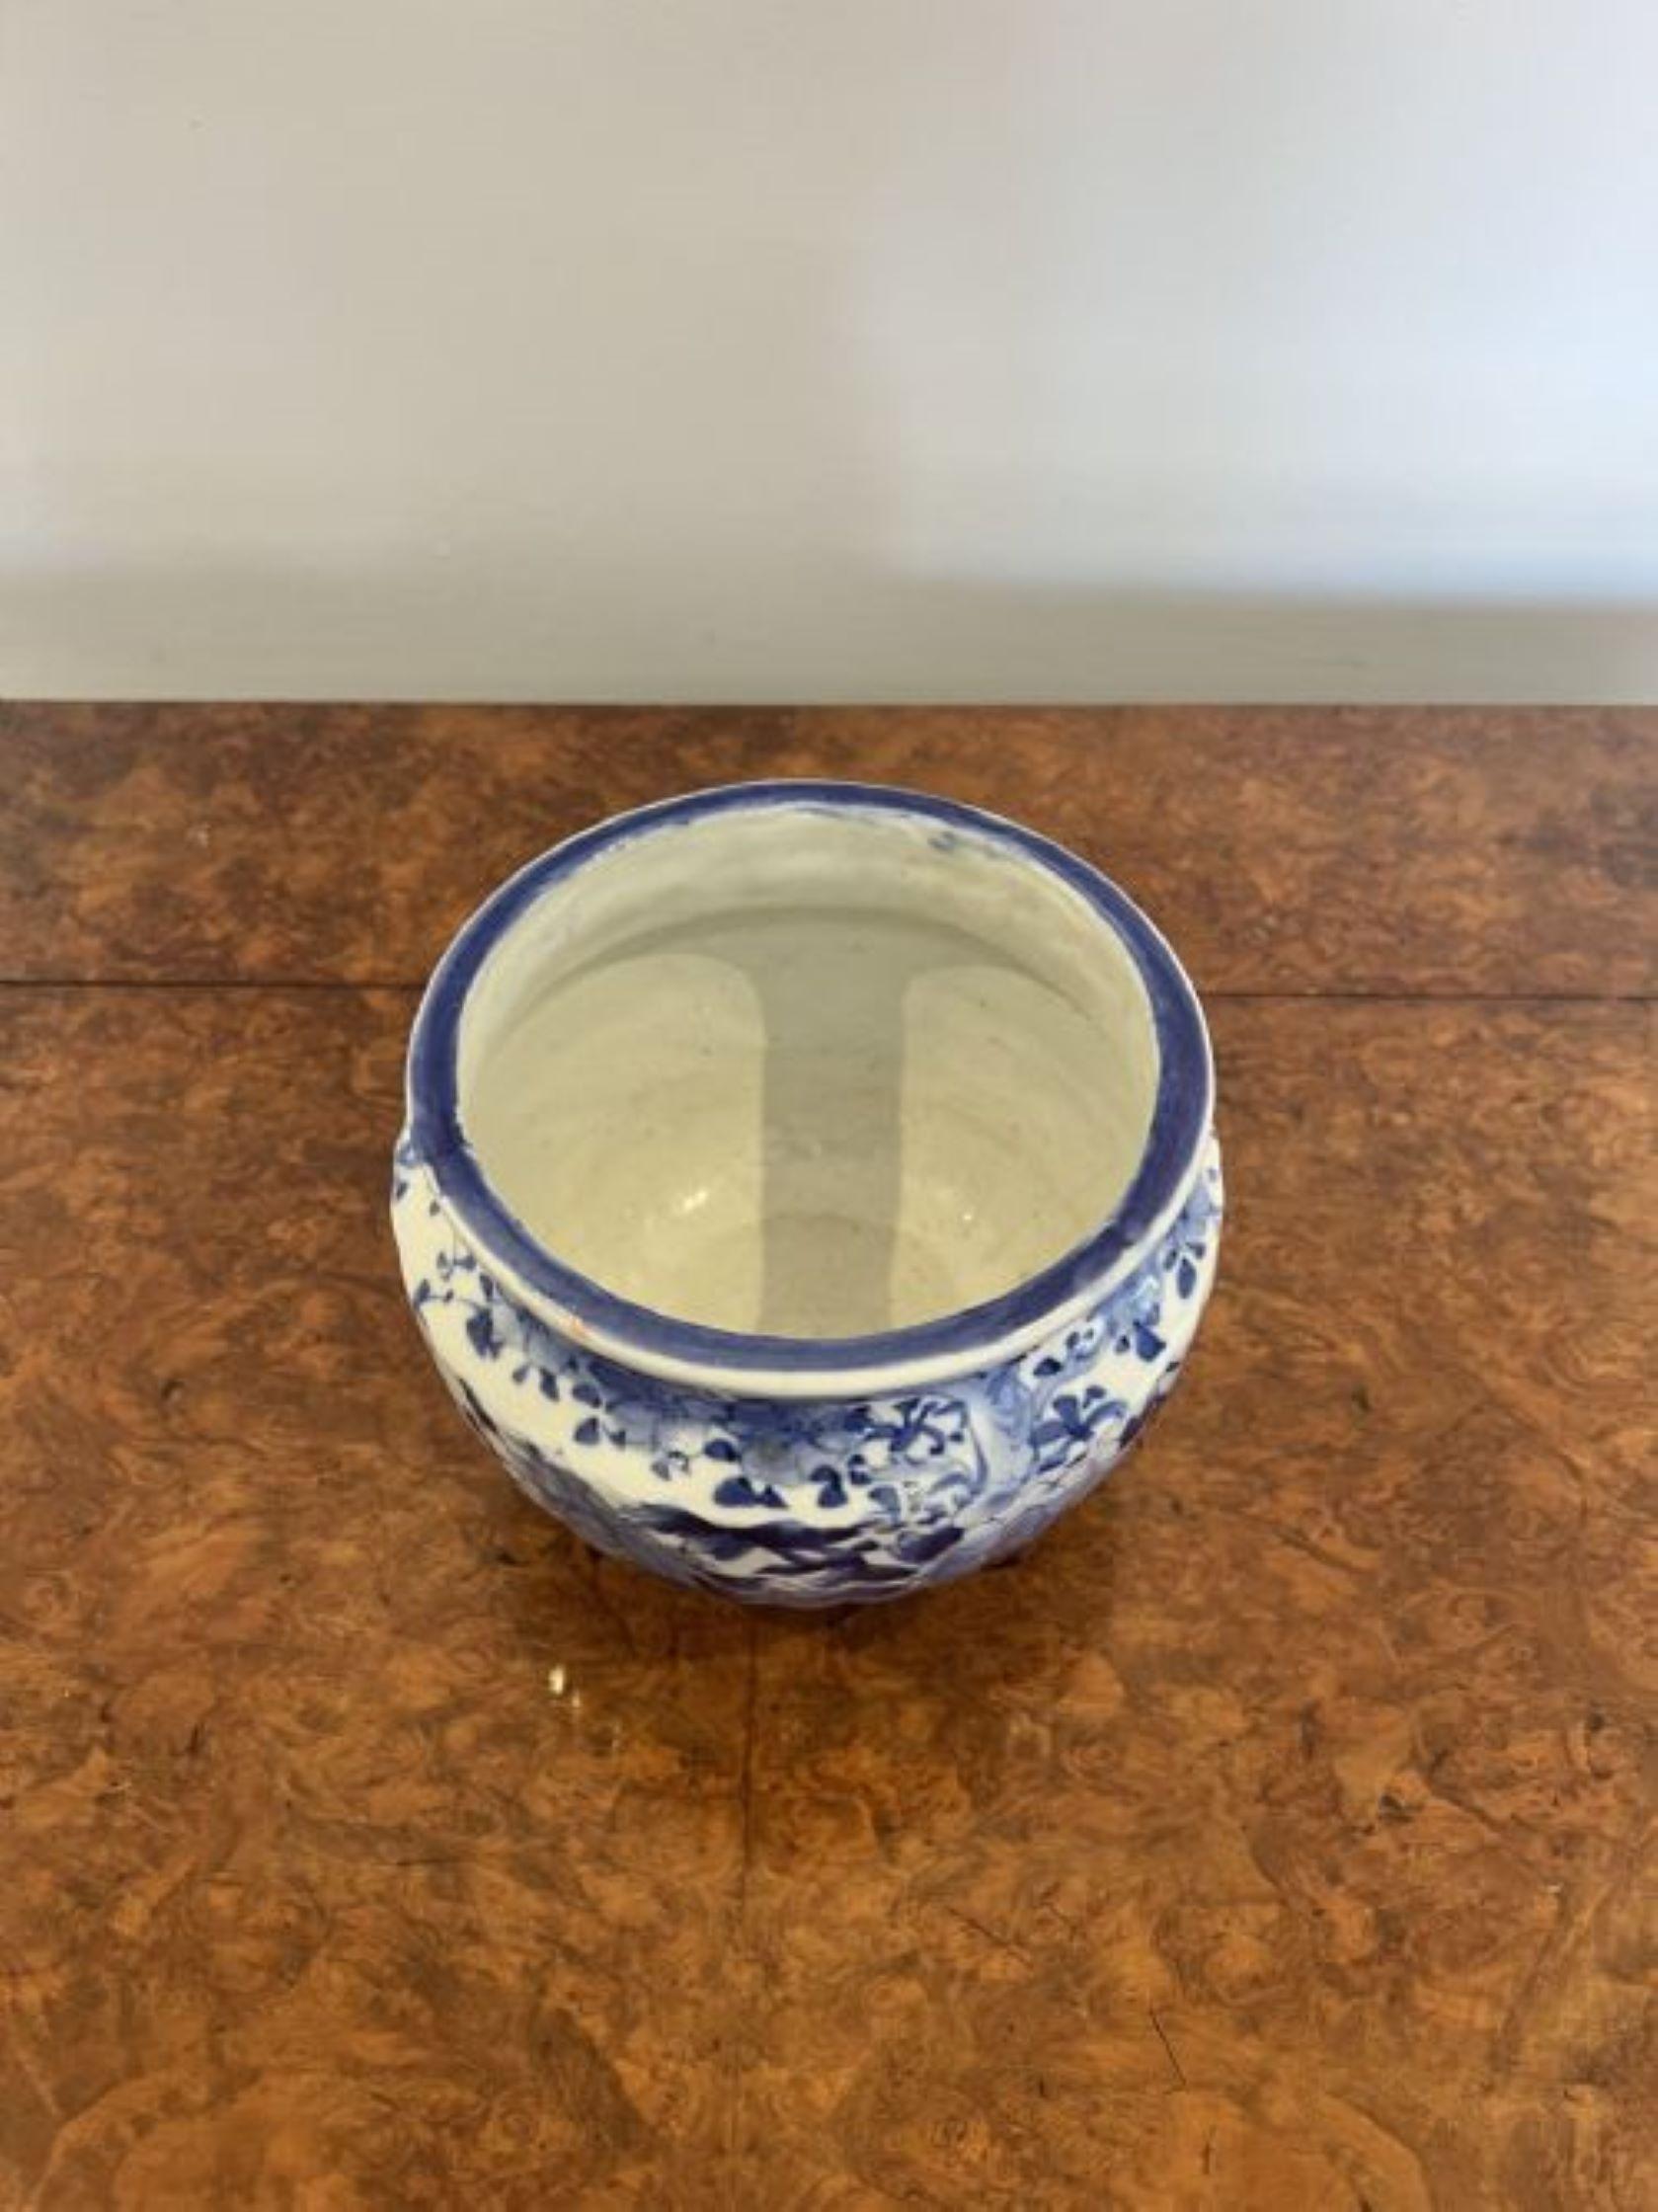 Lovely antique Japanese blue and white jardiniere having a quality antique Japanese blue and white porcelain jardiniere hand painted with floral decoration in wonderful blue and white colours. 